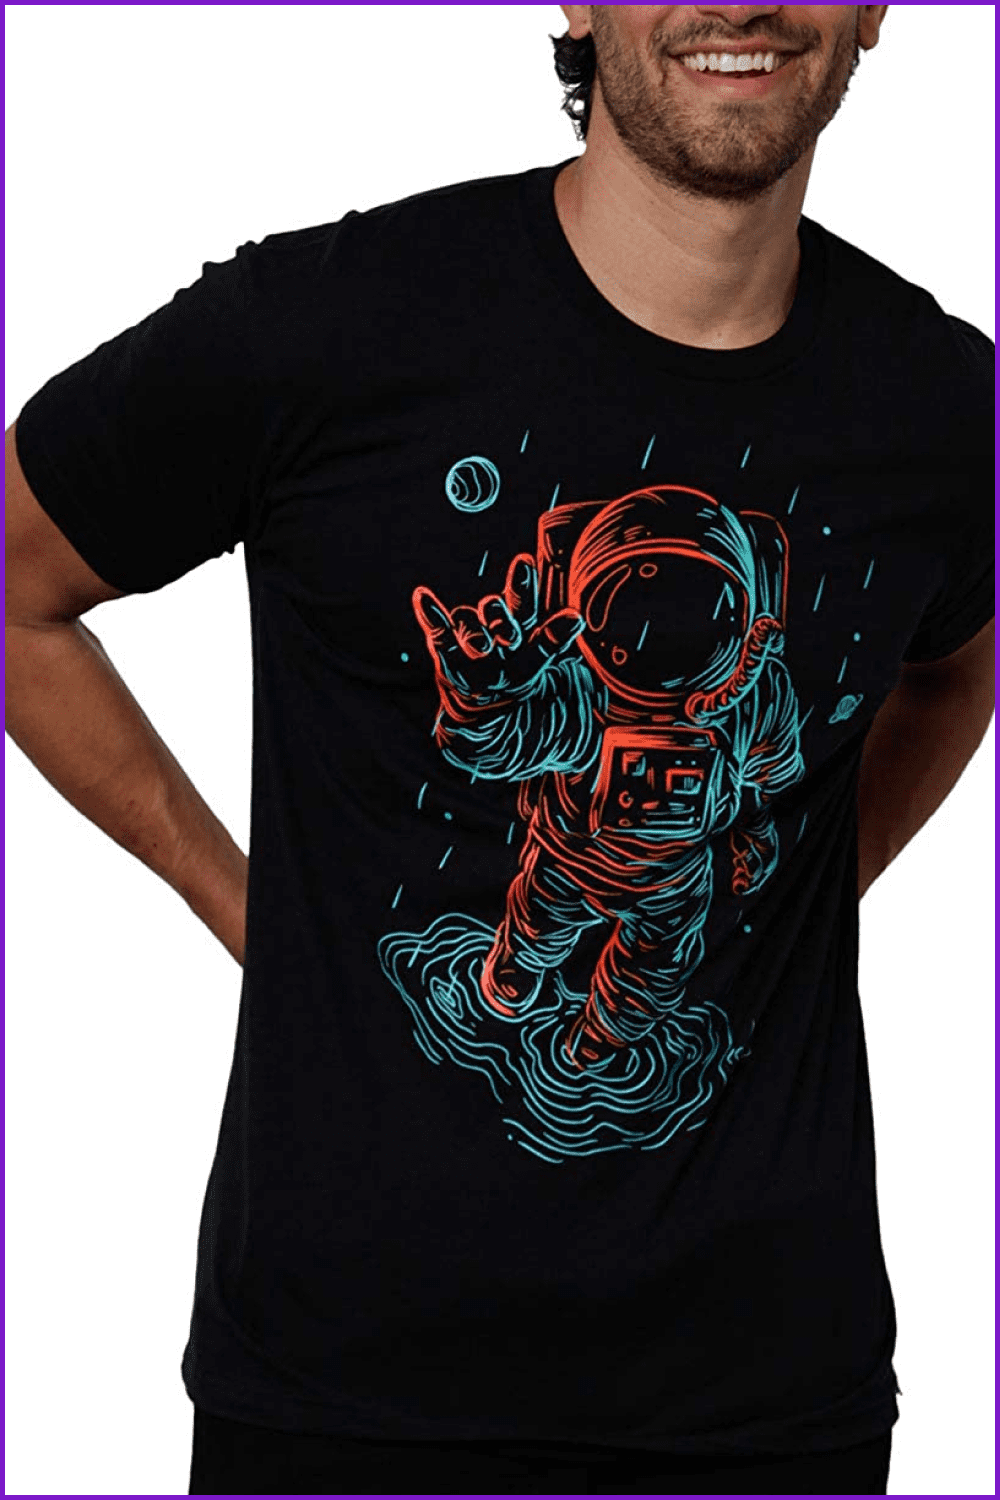 INTO THE AM Graphic Tees for Men – Plain Short Sleeve Casual Crew Neck T-Shirt.